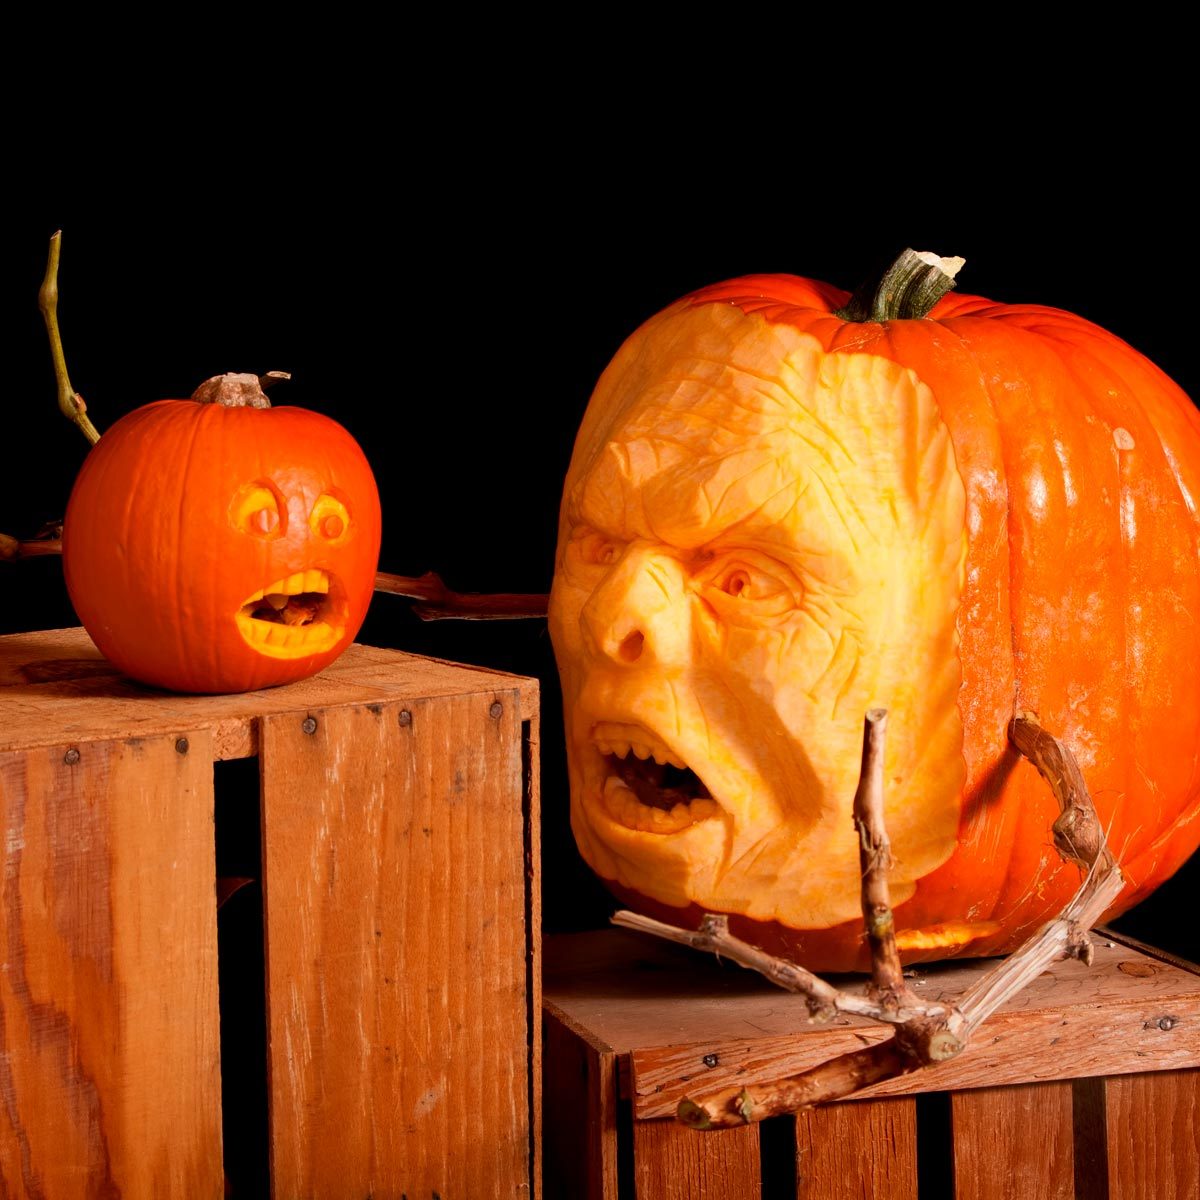 20 Pumpkin Carving Ideas to Inspire You this Halloween | Reader's Digest